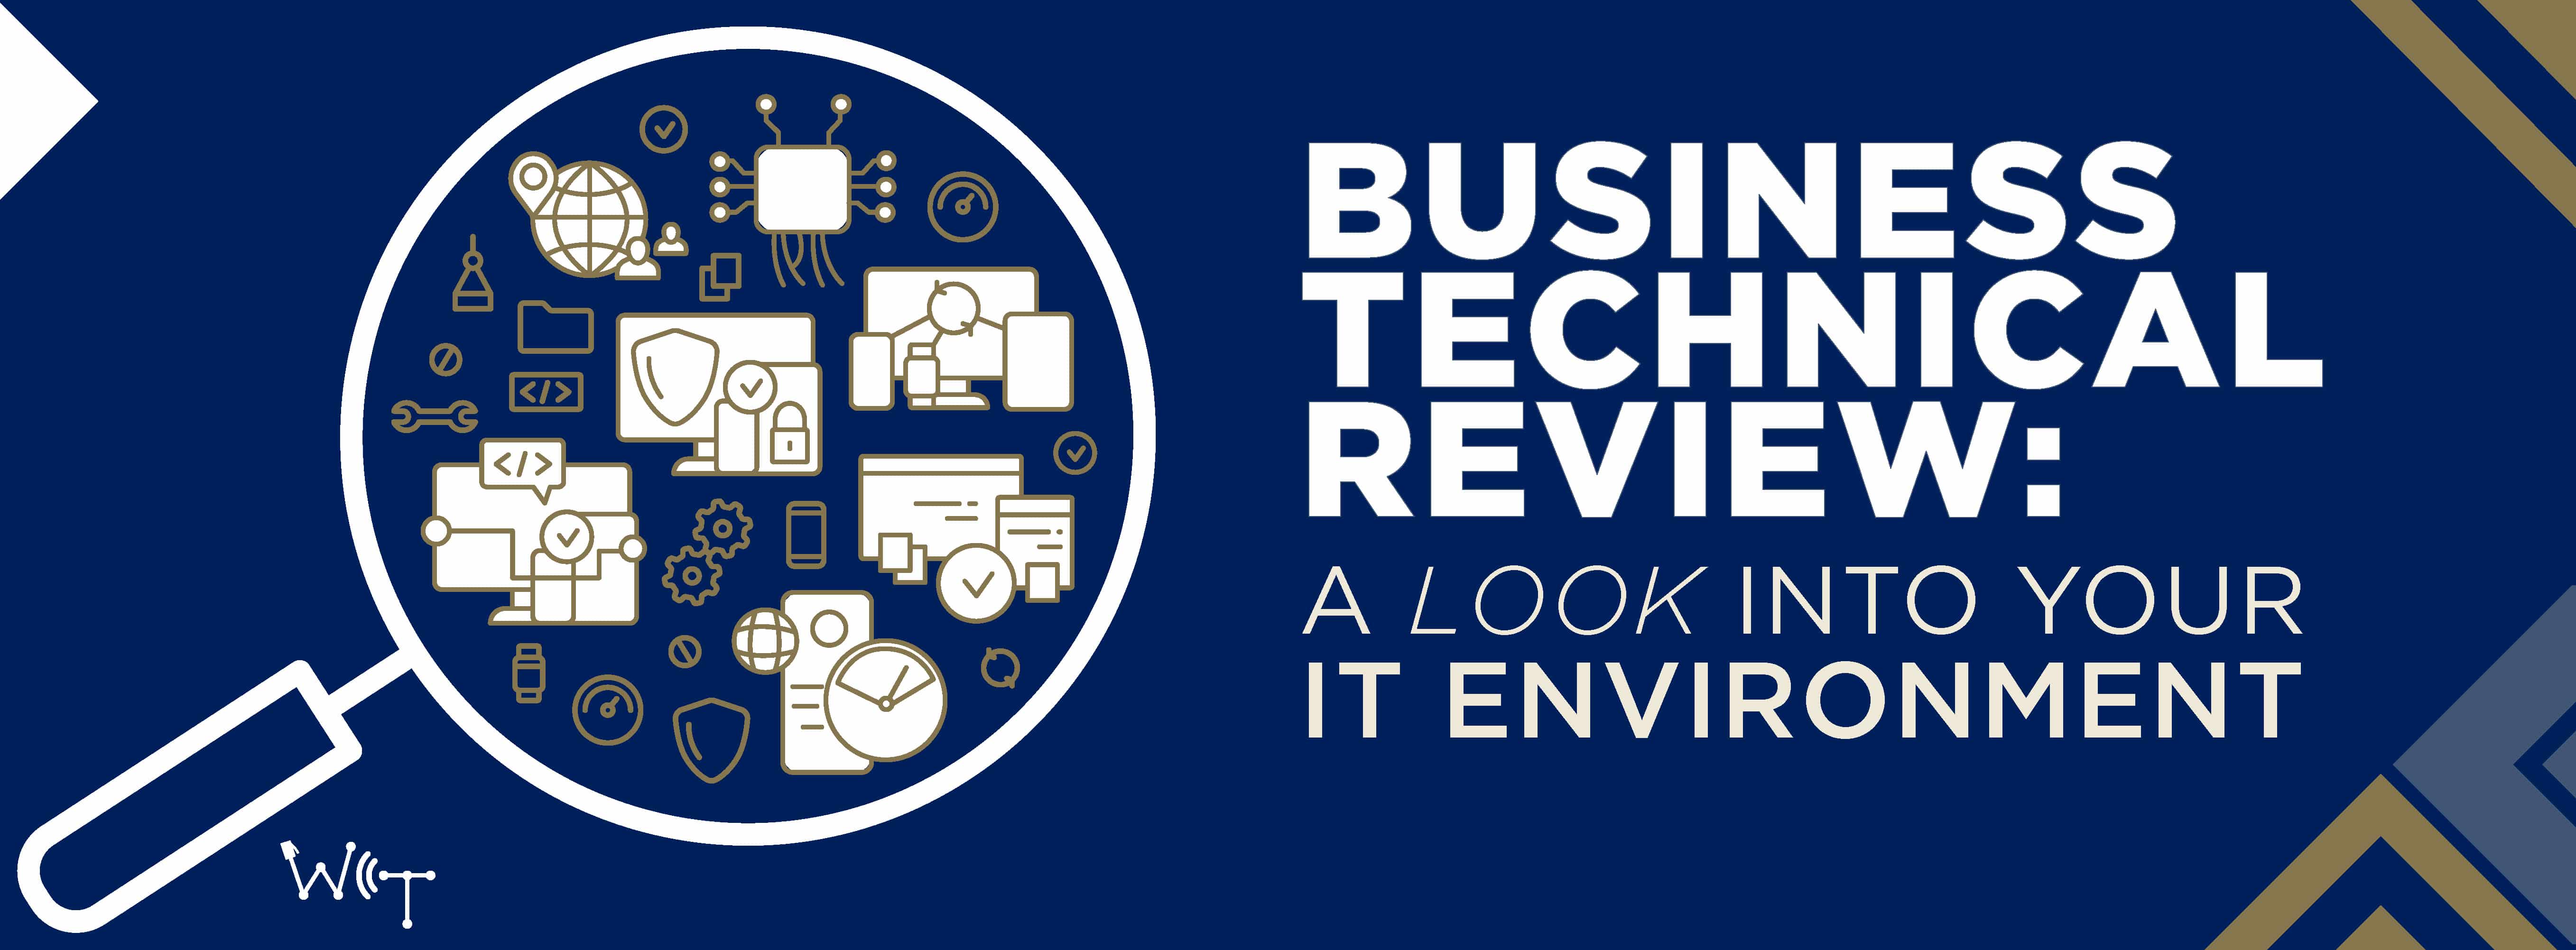 Business Technical Review Header